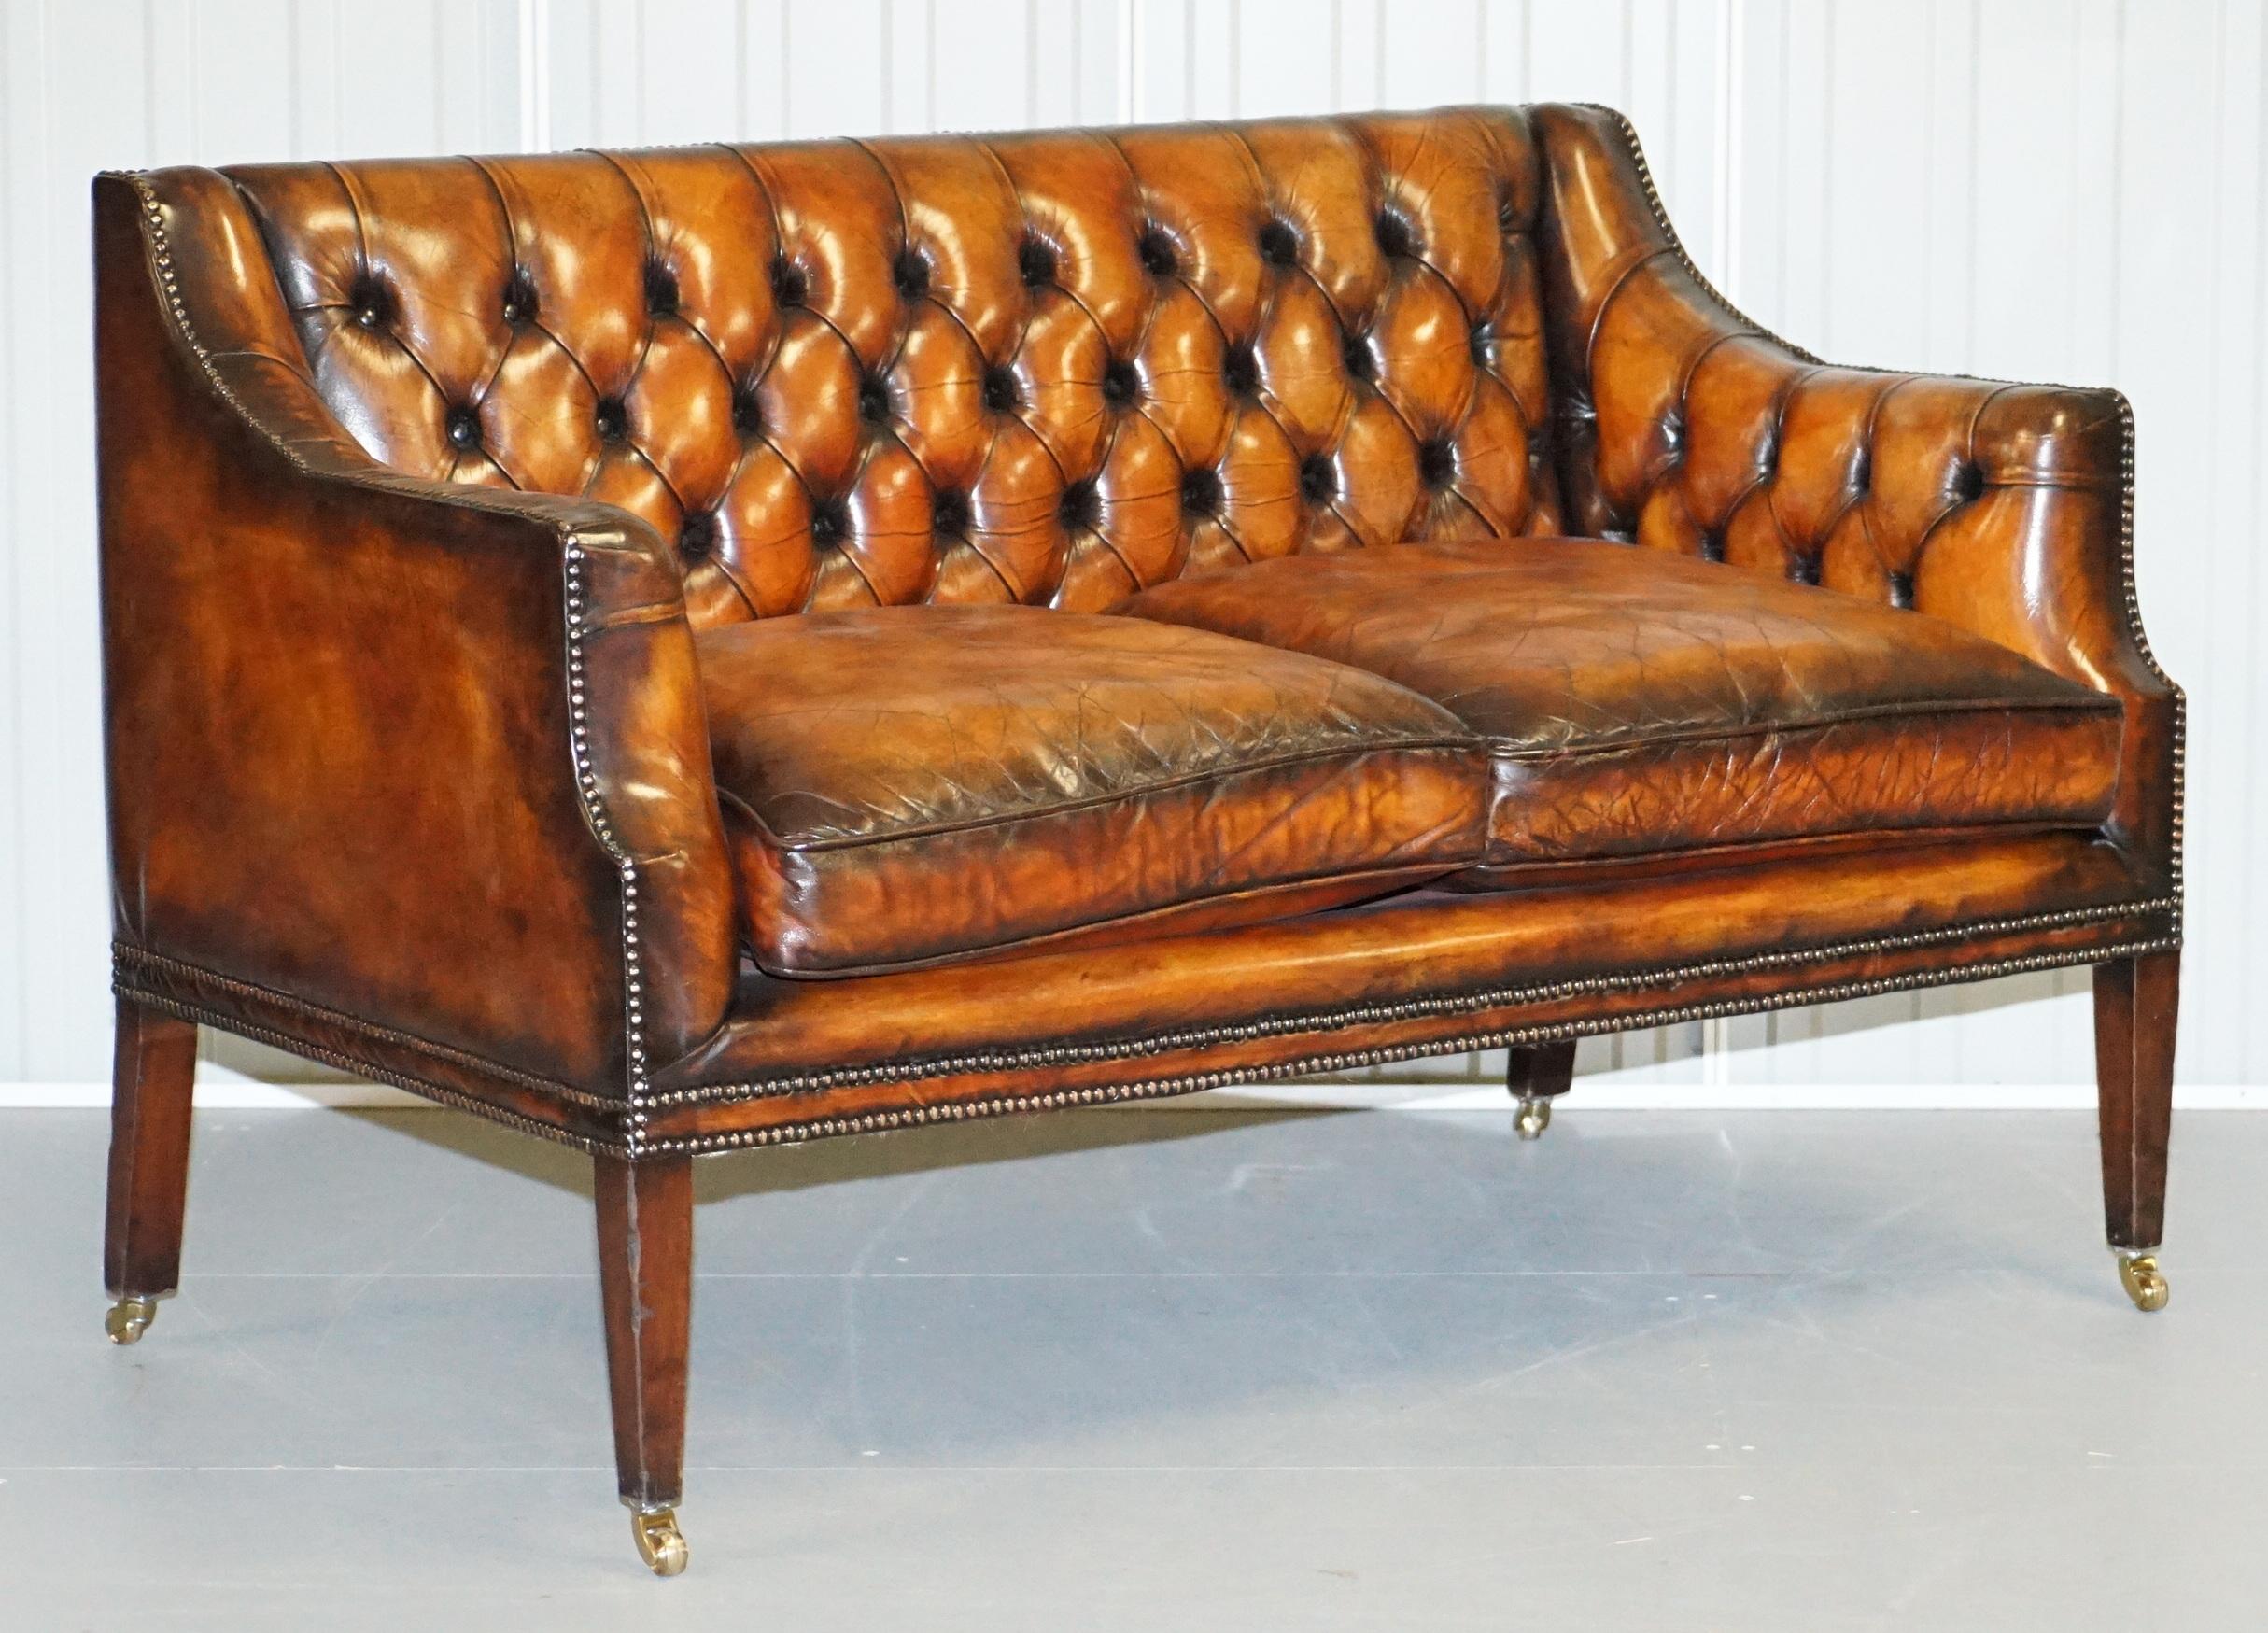 We are delighted to offer for sale this stunning vintage fully restored Chesterfield cigar whisky brown leather Library suite

A very rare find, I never come across original sets of three pieces from this era. We have fully restored the suite and